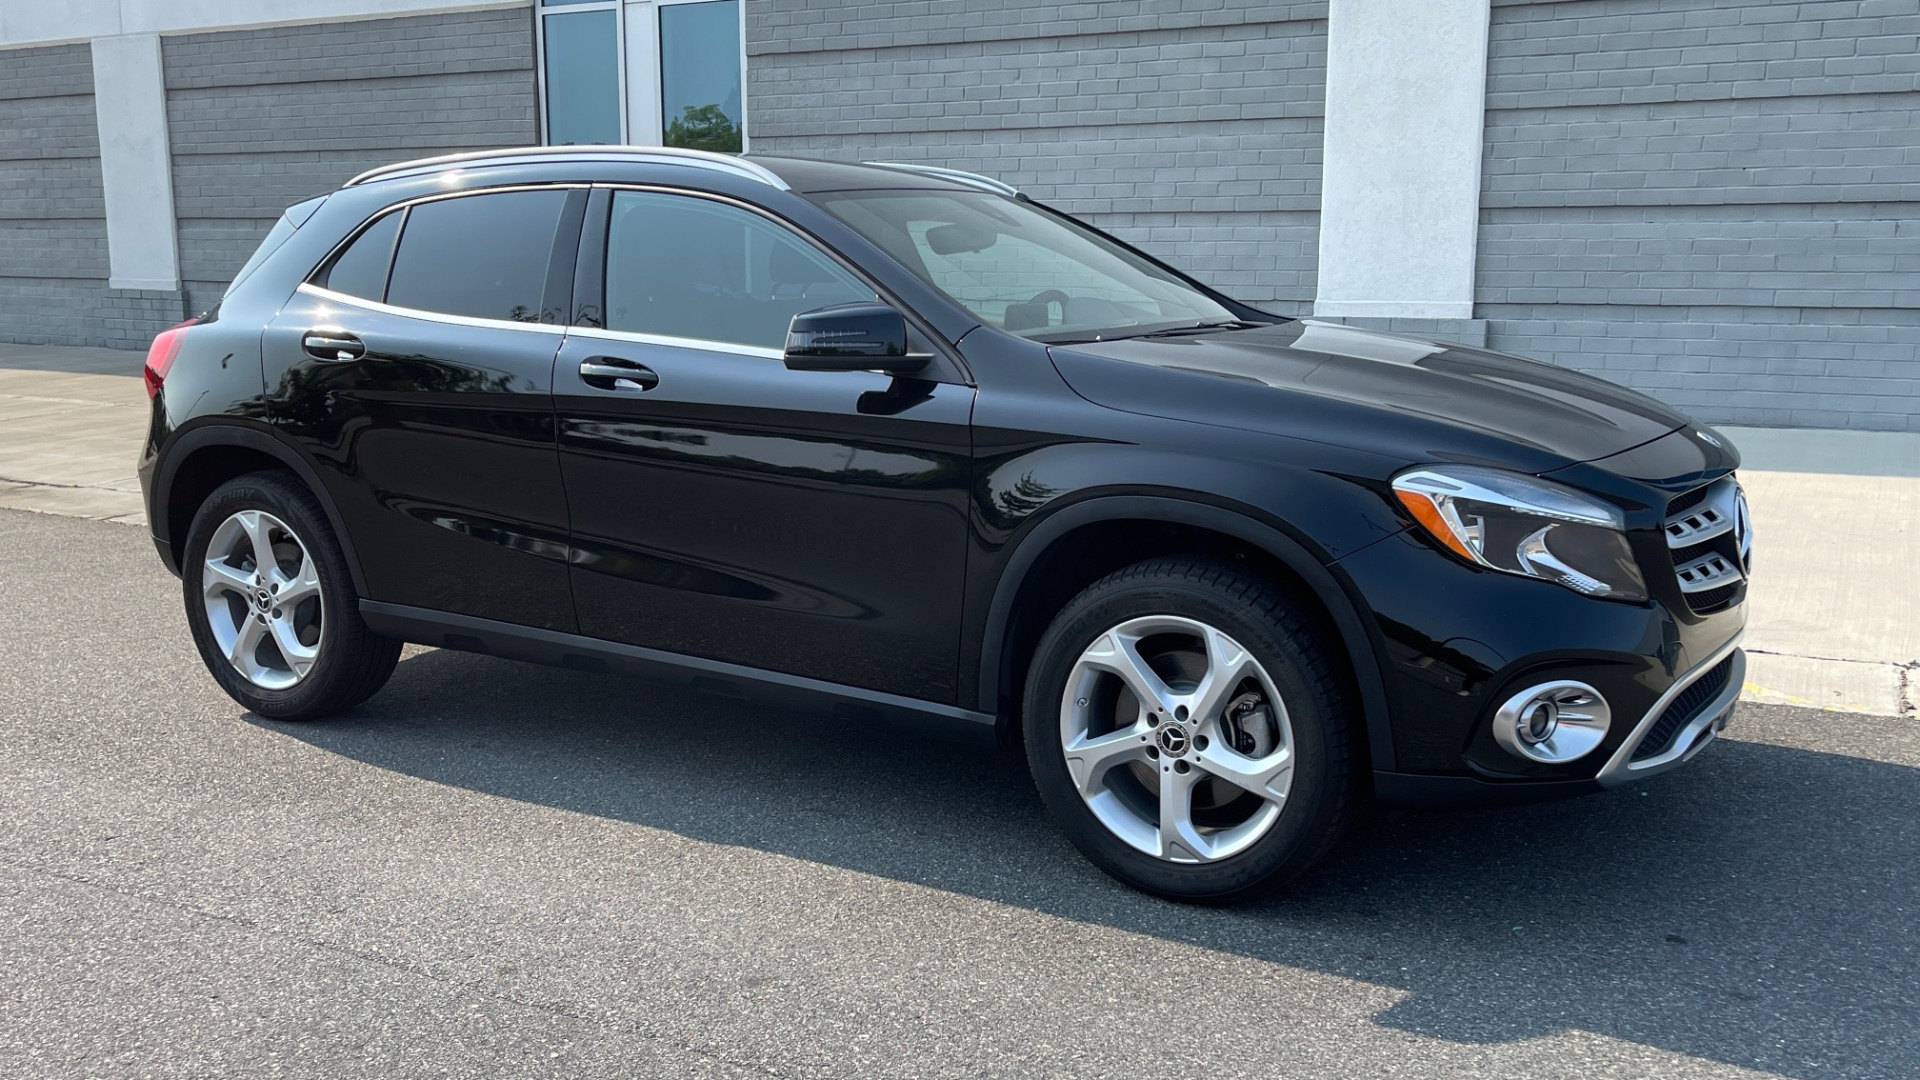 Used 2018 Mercedes-Benz GLA 250 SUV / GARMIN MAP PILOT / 18IN WHEELS / REARVIEW for sale Sold at Formula Imports in Charlotte NC 28227 5